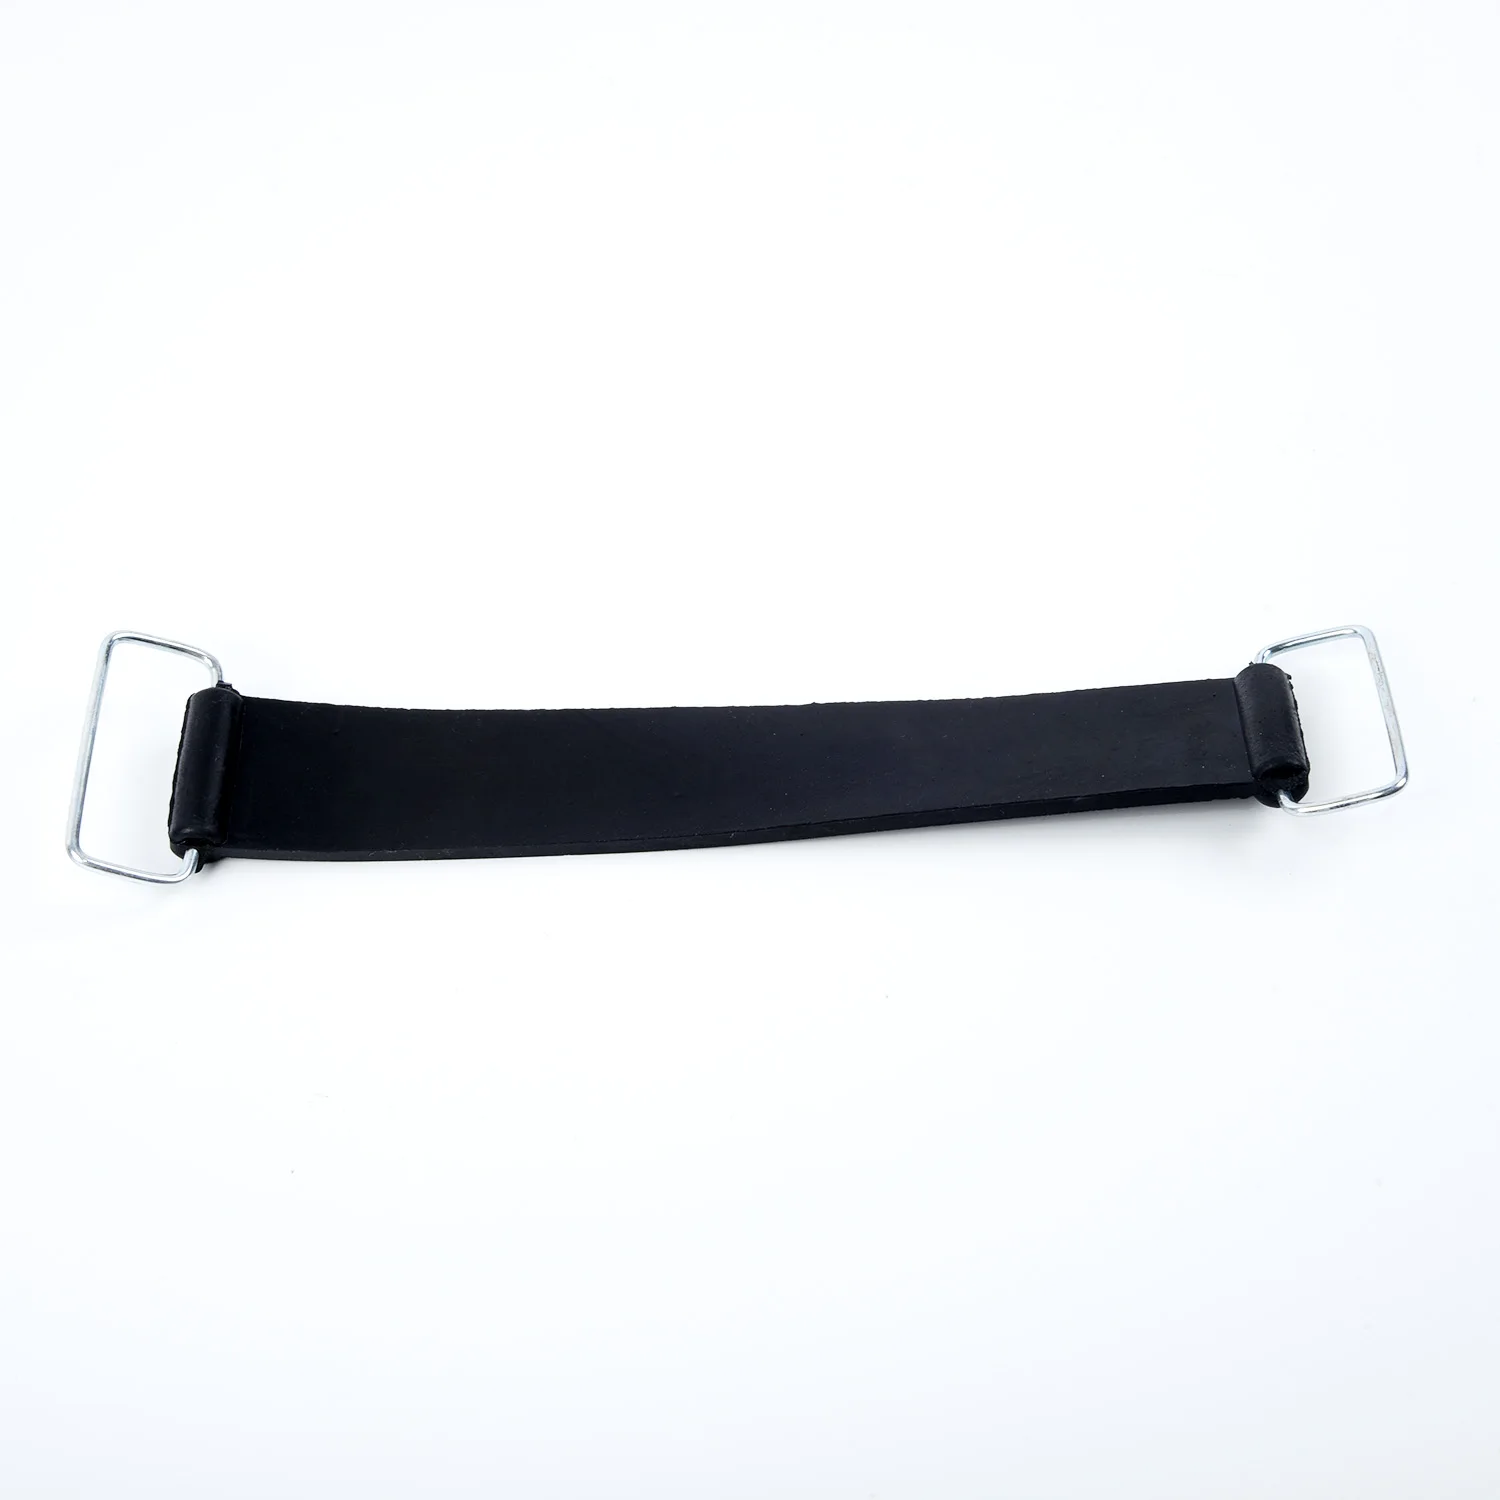 Holder Rubber Strap Belt 1pc Waterproof Black Fixed Universal 18-23cm Motorcycle Scooters Battery Durable New Useful